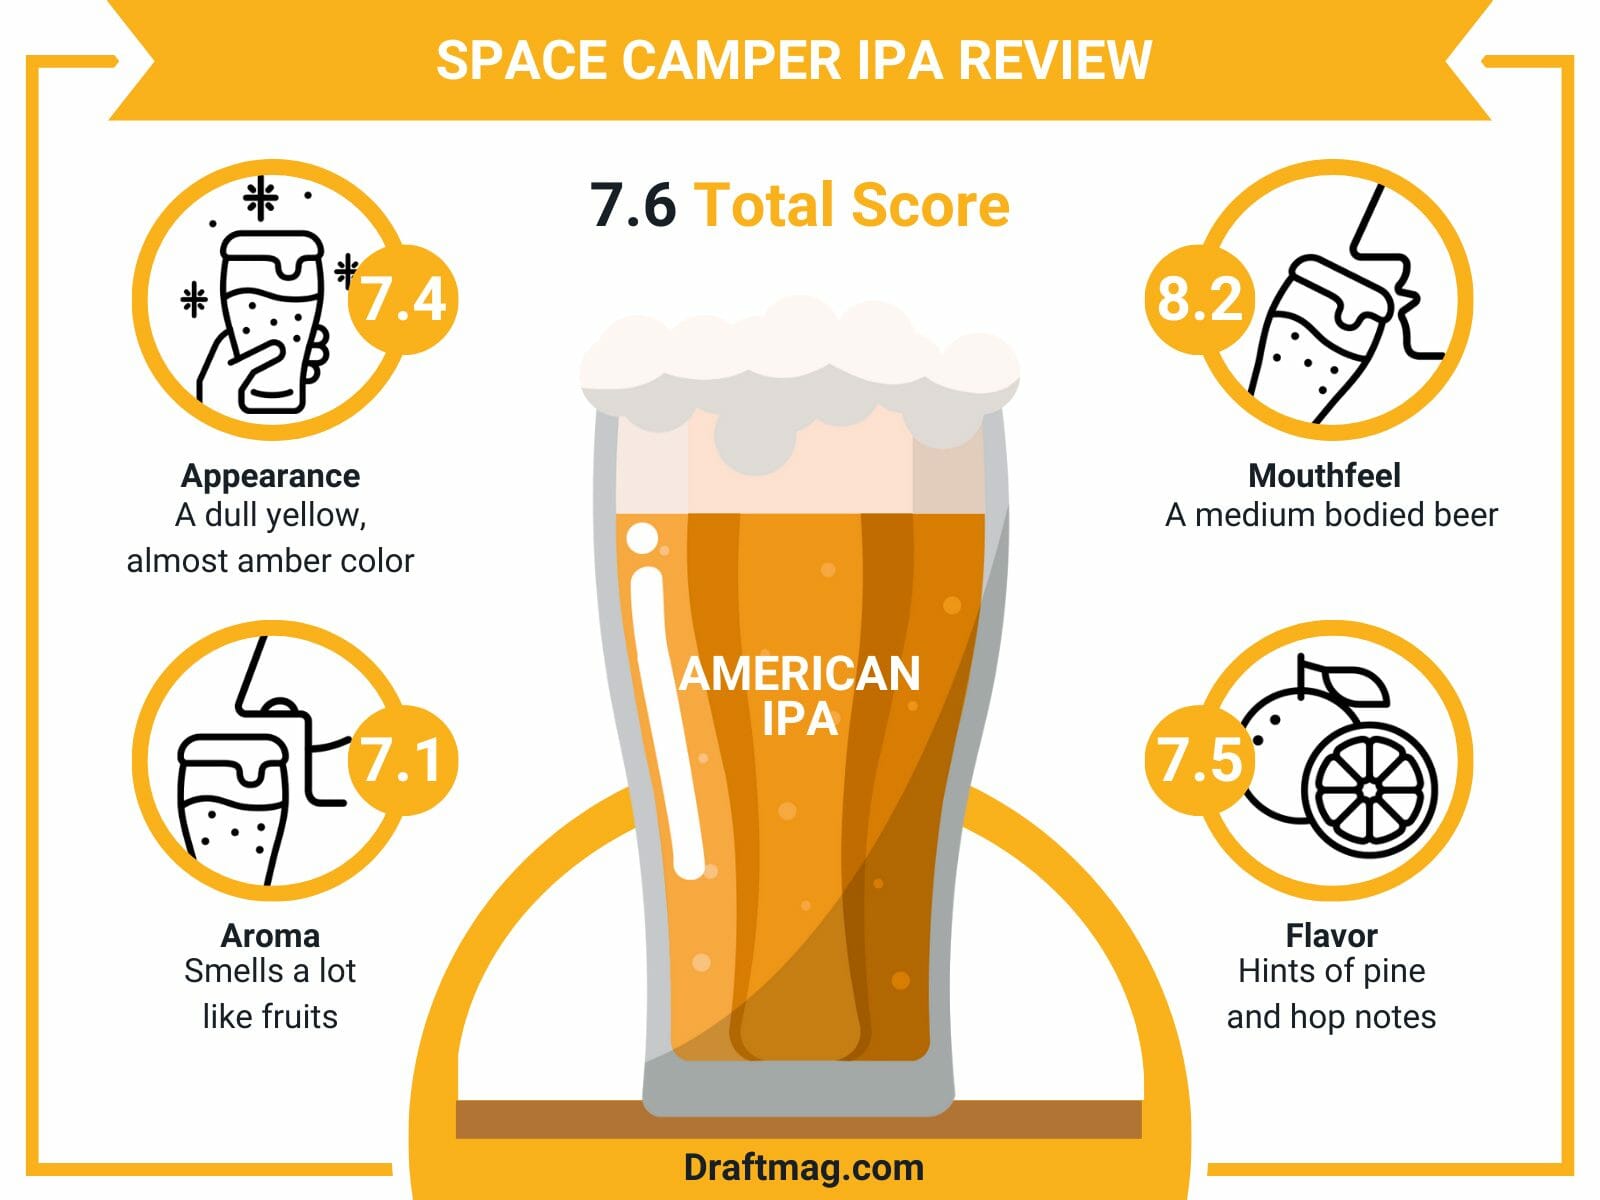 Space Camper Ipa Review Infographic